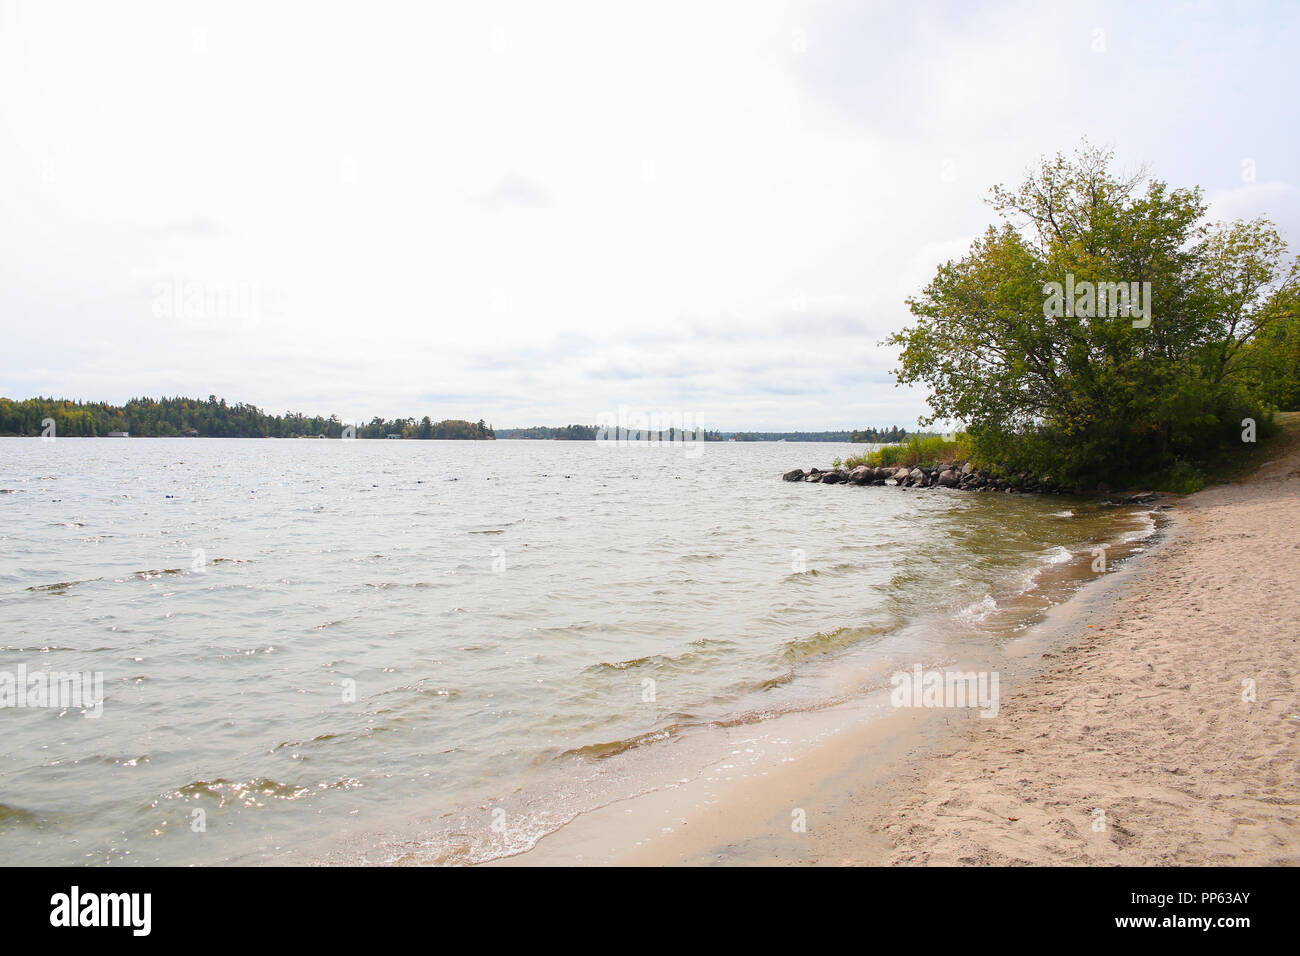 Peacefull landscape view. Lake of the Woods, Kenora, Canada. Stock Photo